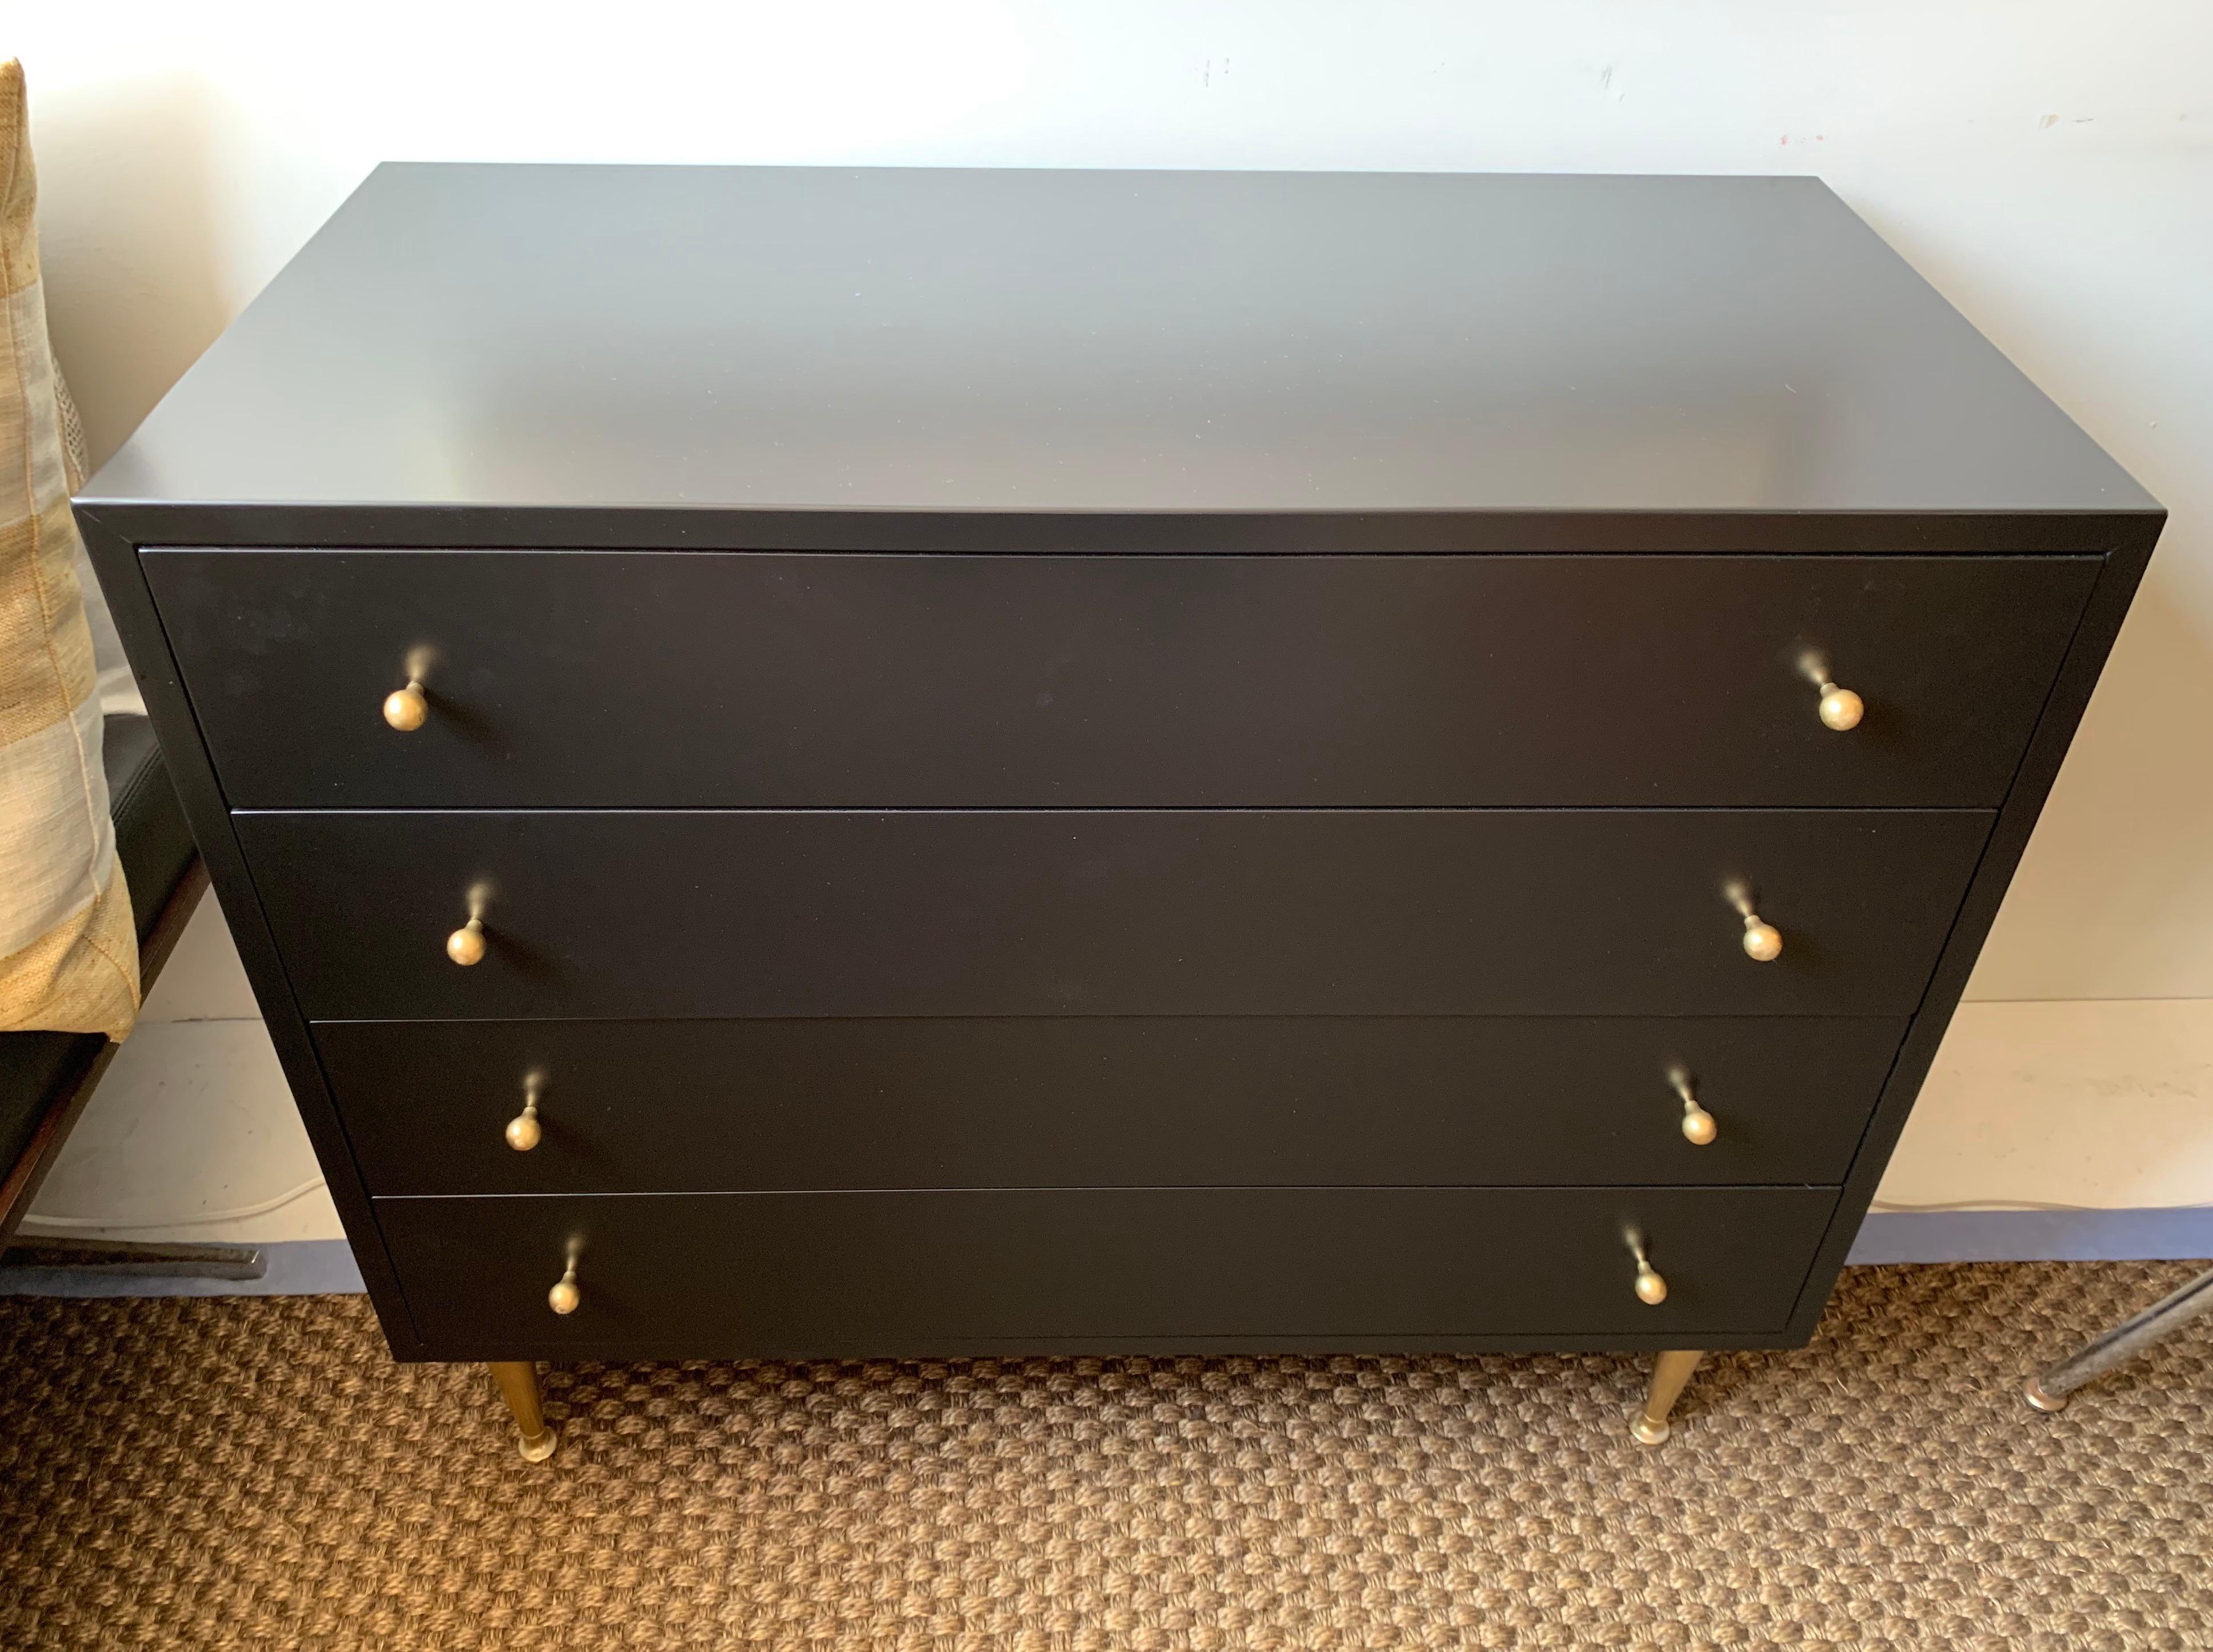 Newly refurbished, dark, dark navy, almost looks black under certain light, small four drawer commode,
circa 1970s with iconic midcentury lines.